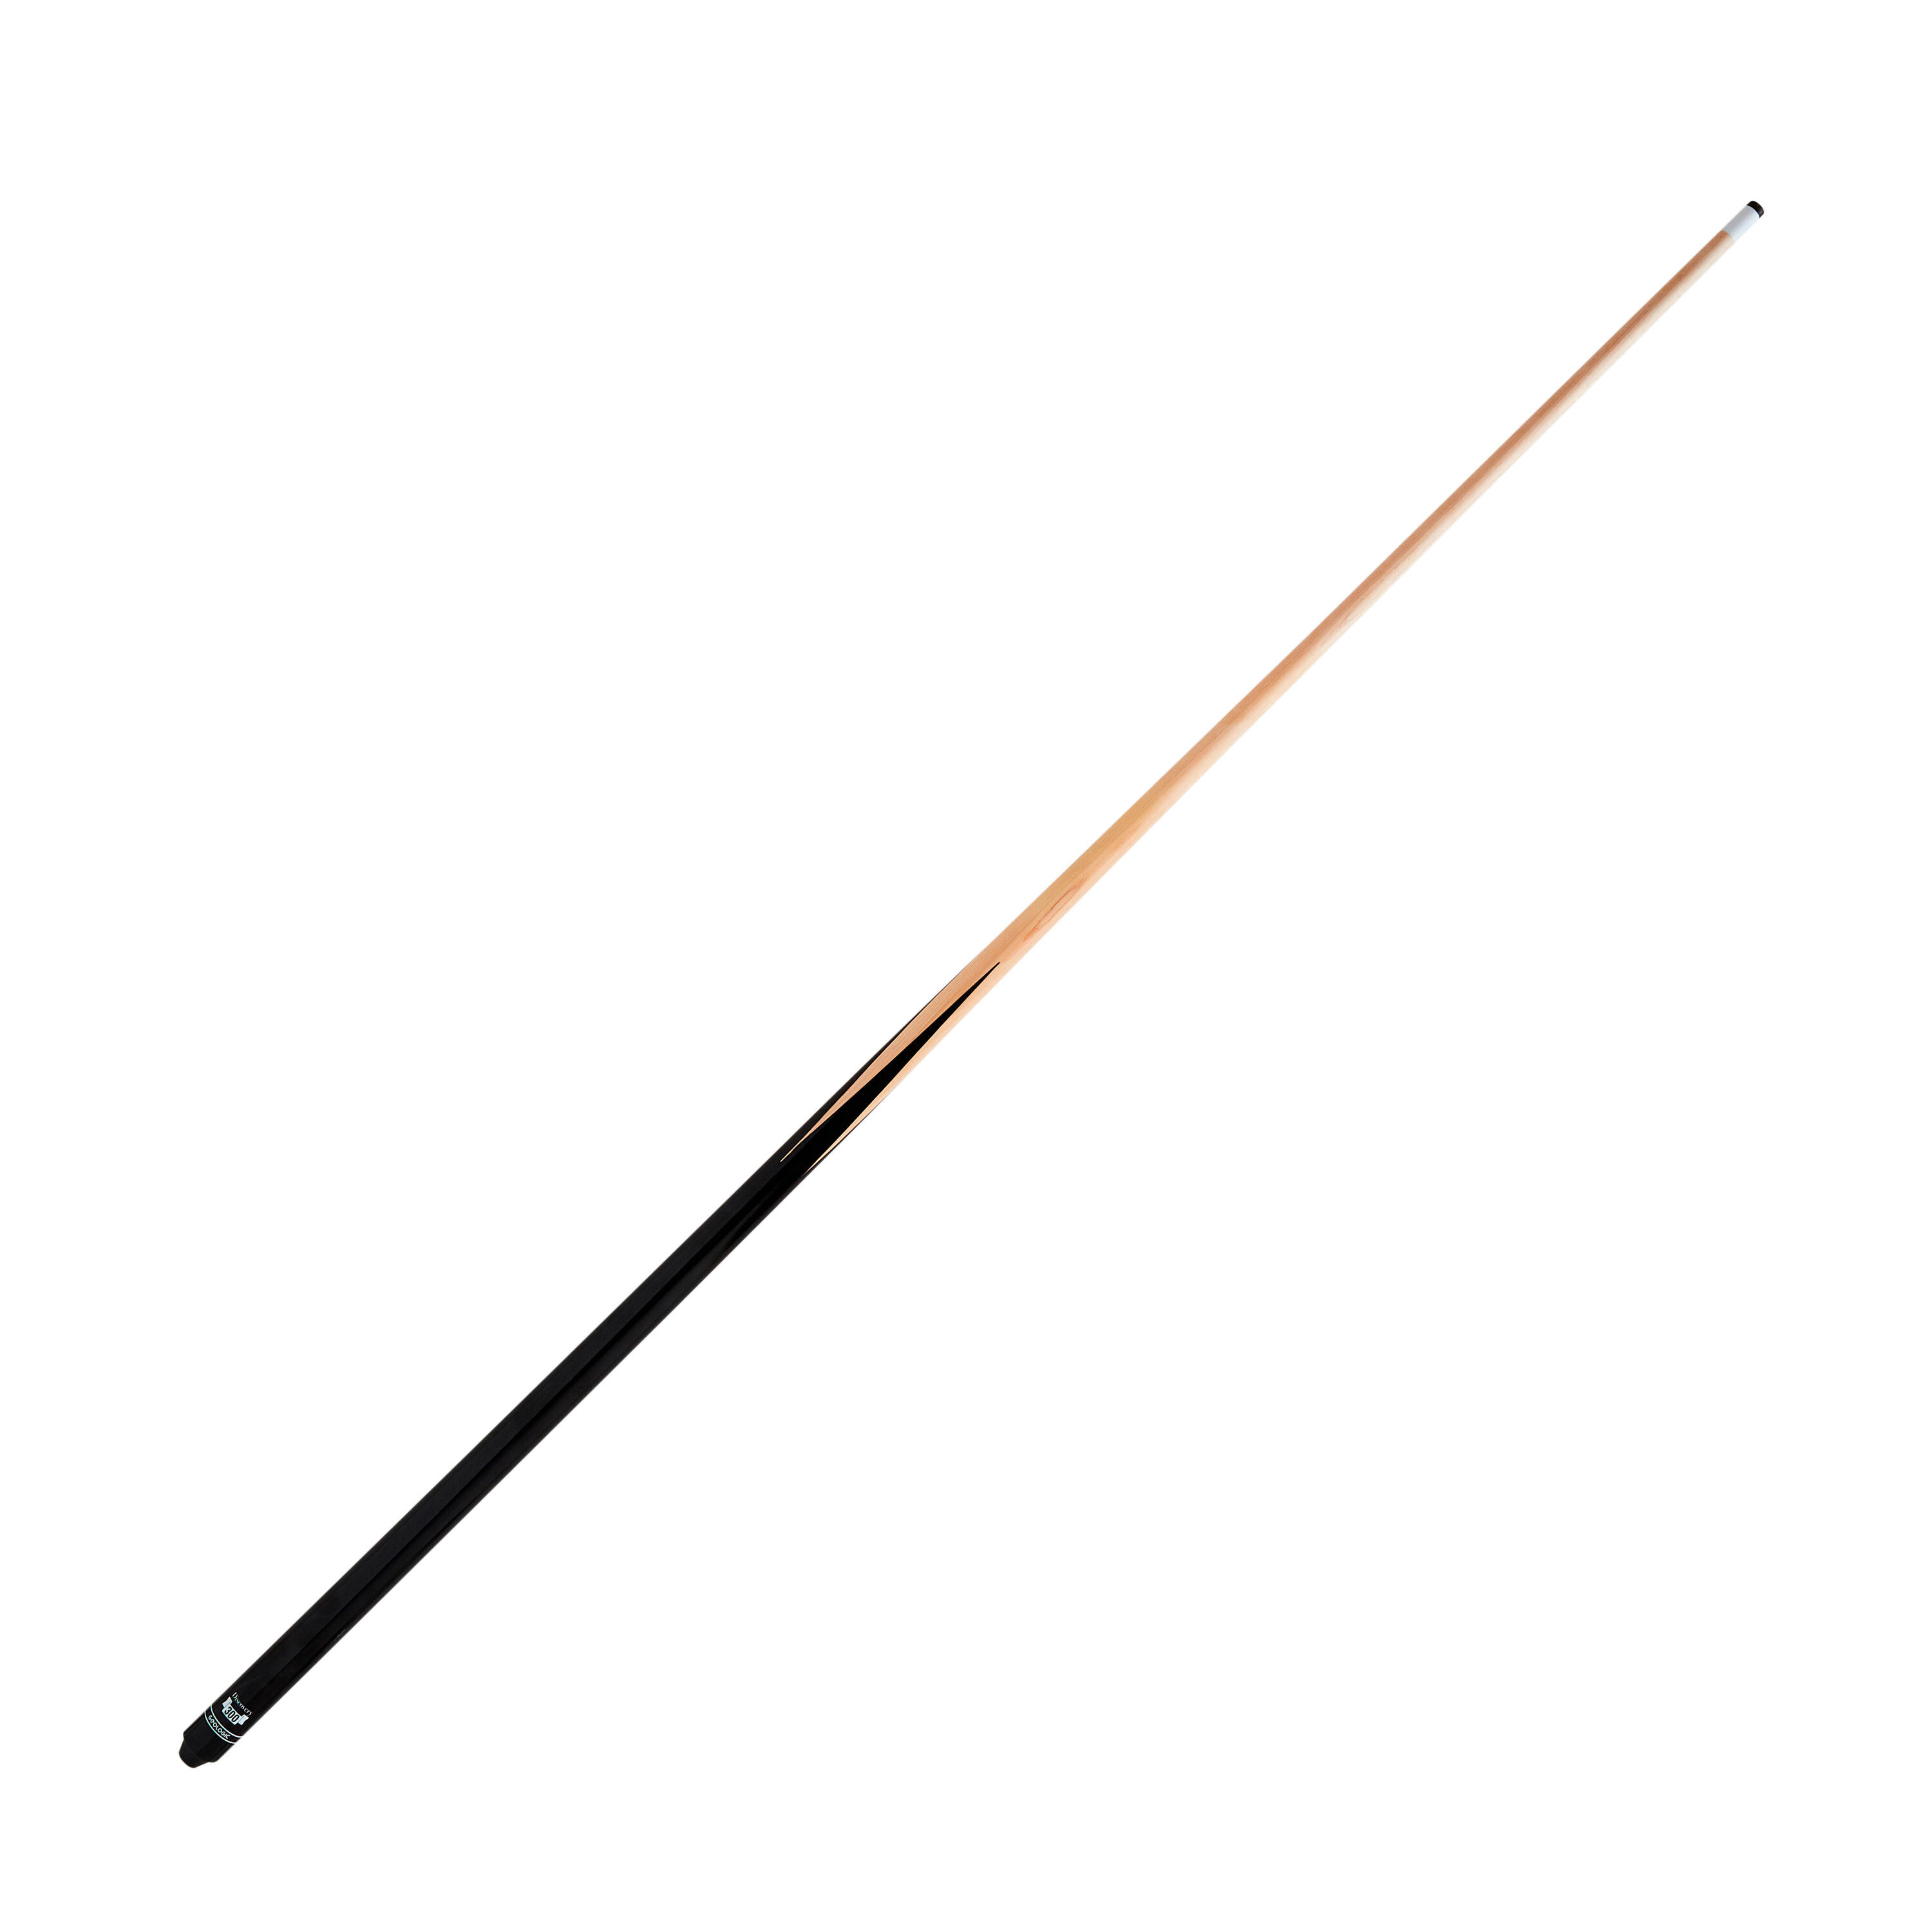 Discovery 300 American Pool Cue, 1-Part - 122 cm (48") 1/6